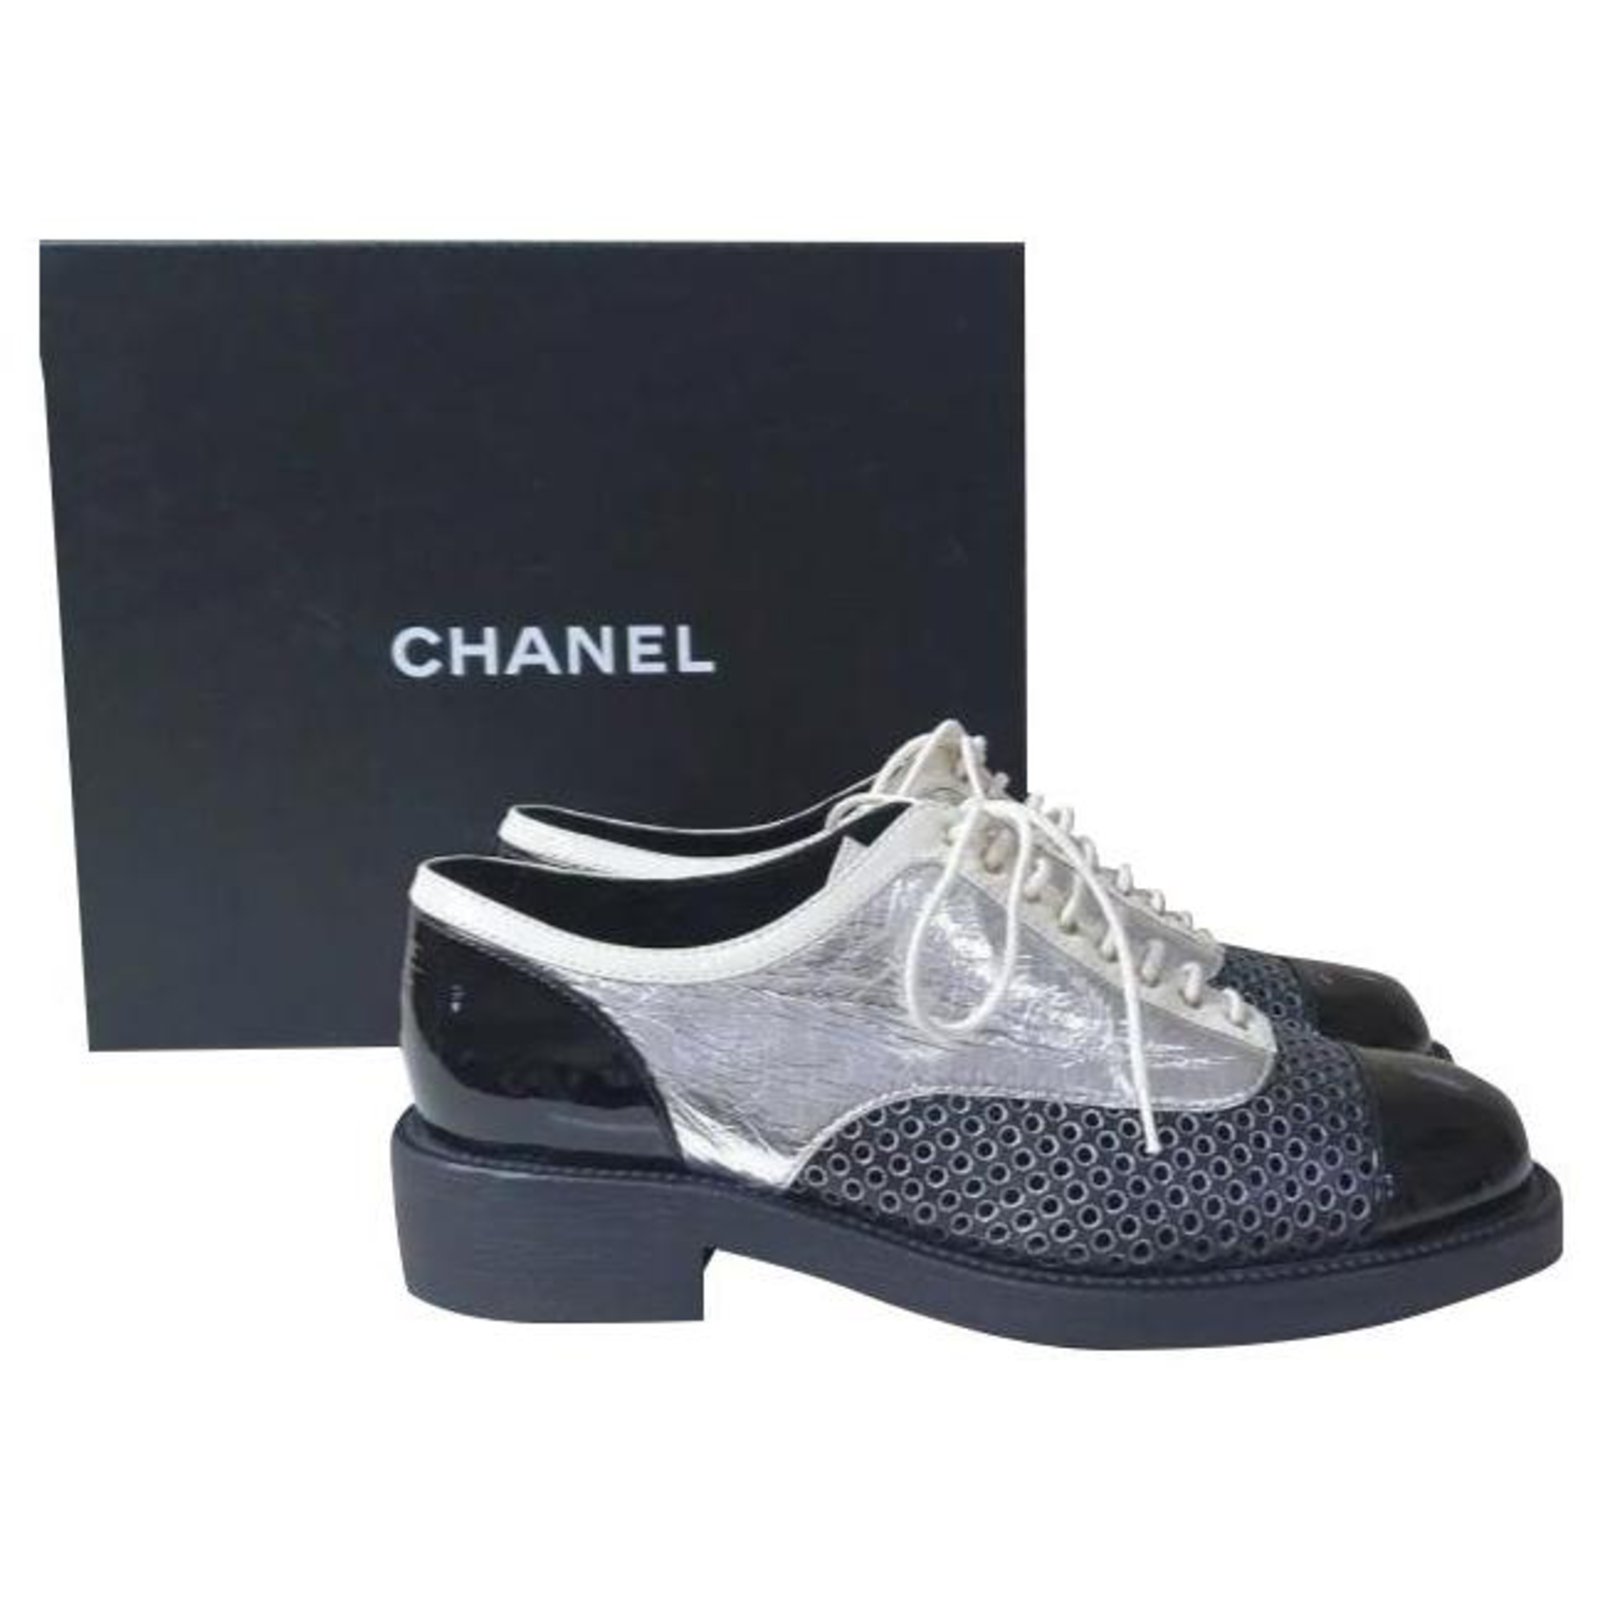 Chanel Gold Silver Black Patent Leather Loafers Shoes Sz 40